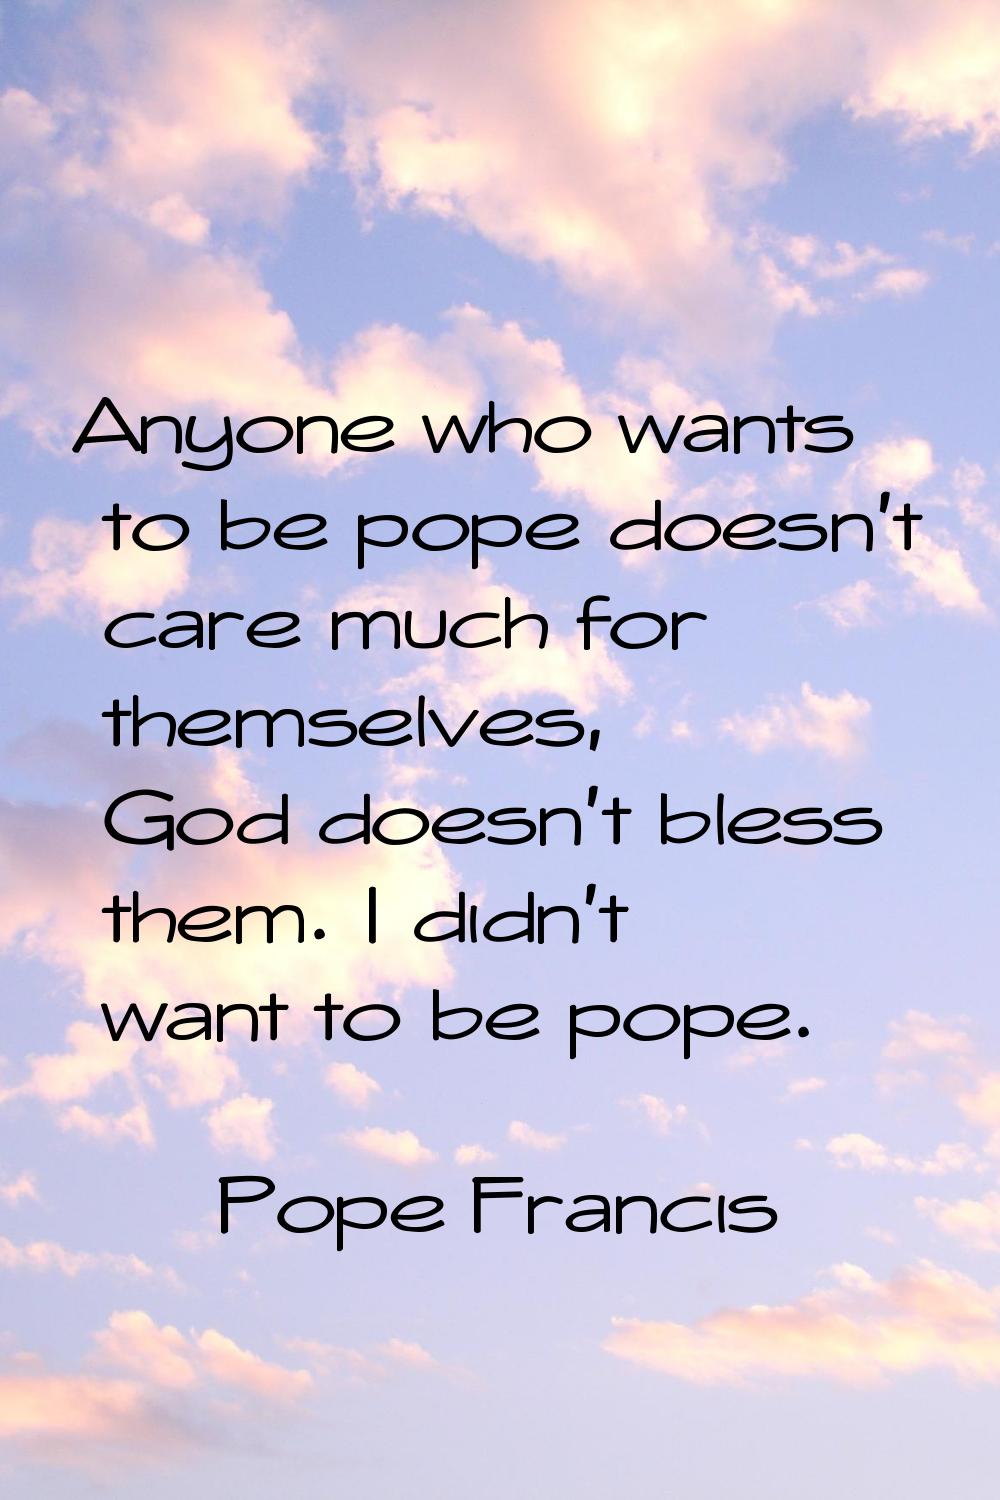 Anyone who wants to be pope doesn't care much for themselves, God doesn't bless them. I didn't want